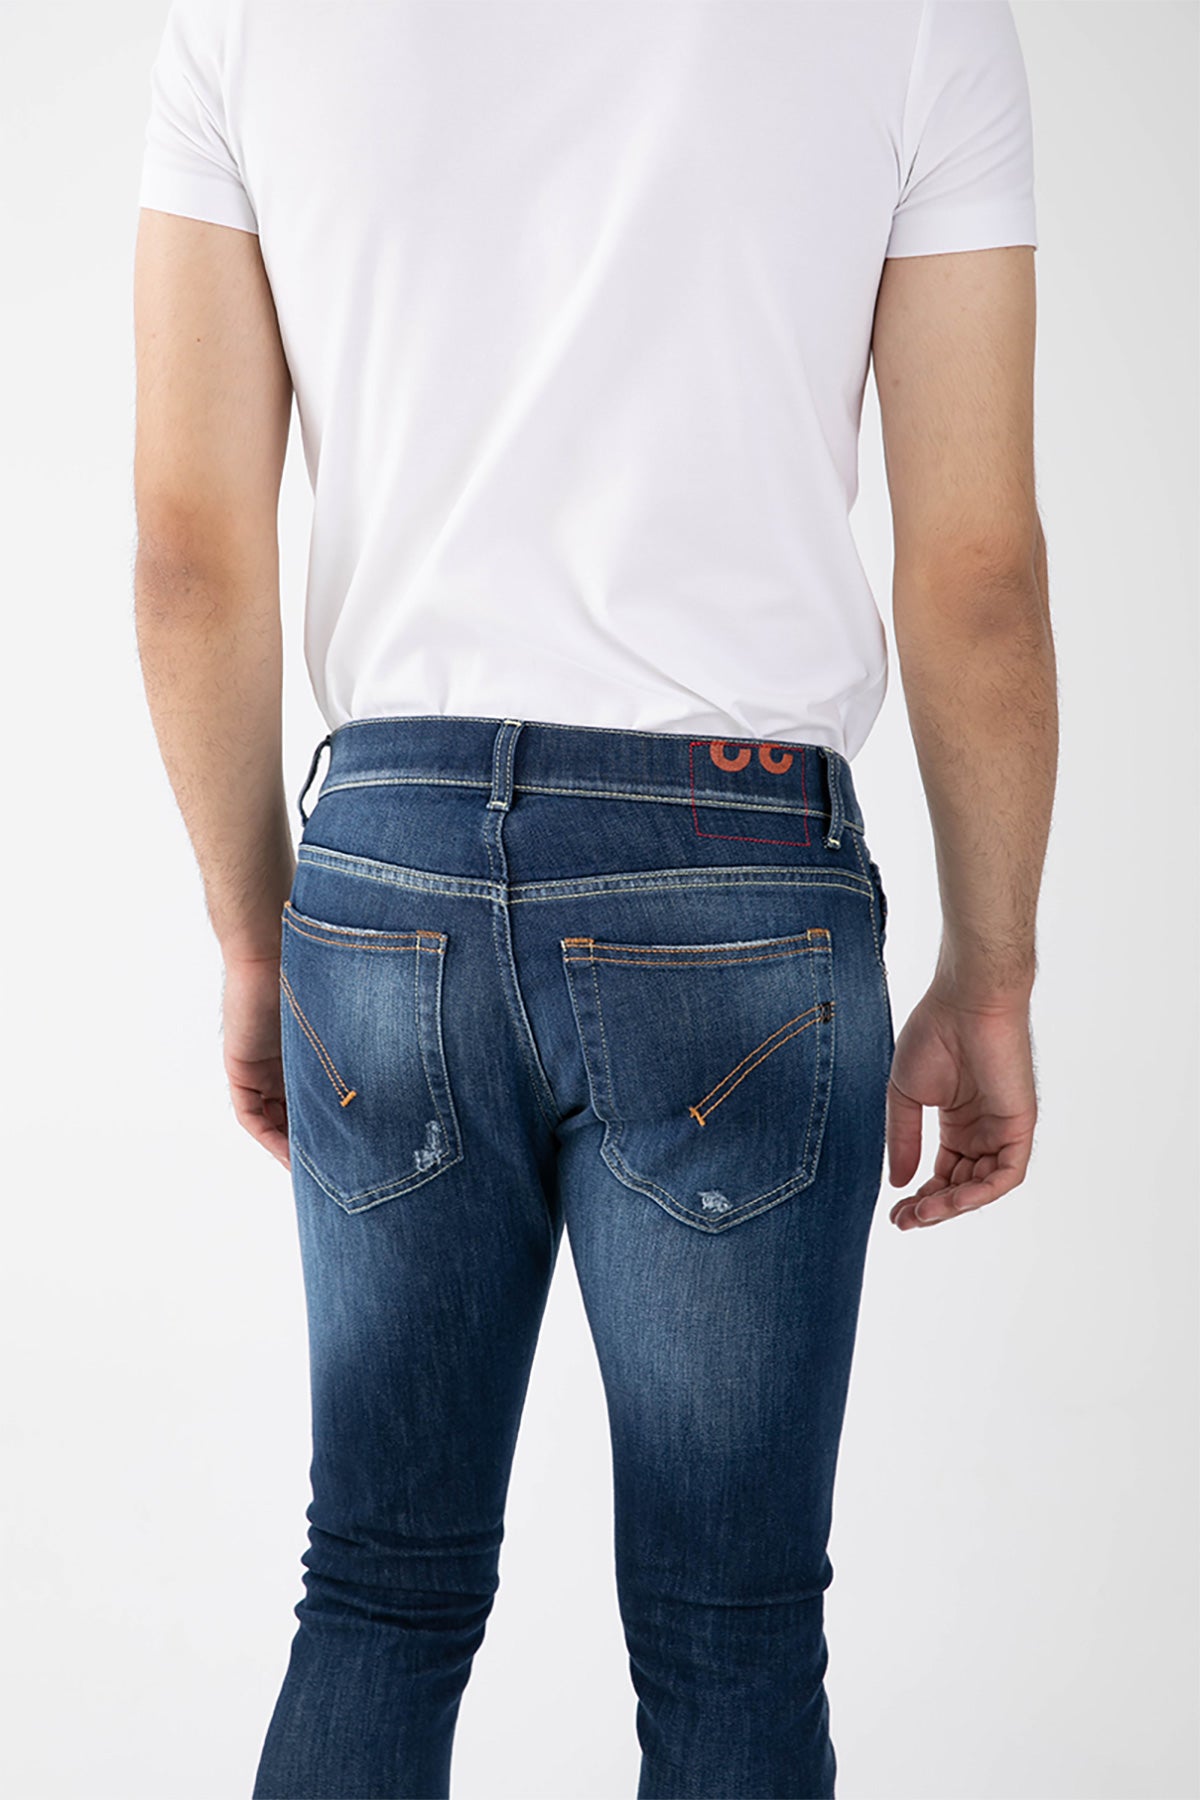 Dondup Ritchie Skinny Fit Jeans-Libas Trendy Fashion Store